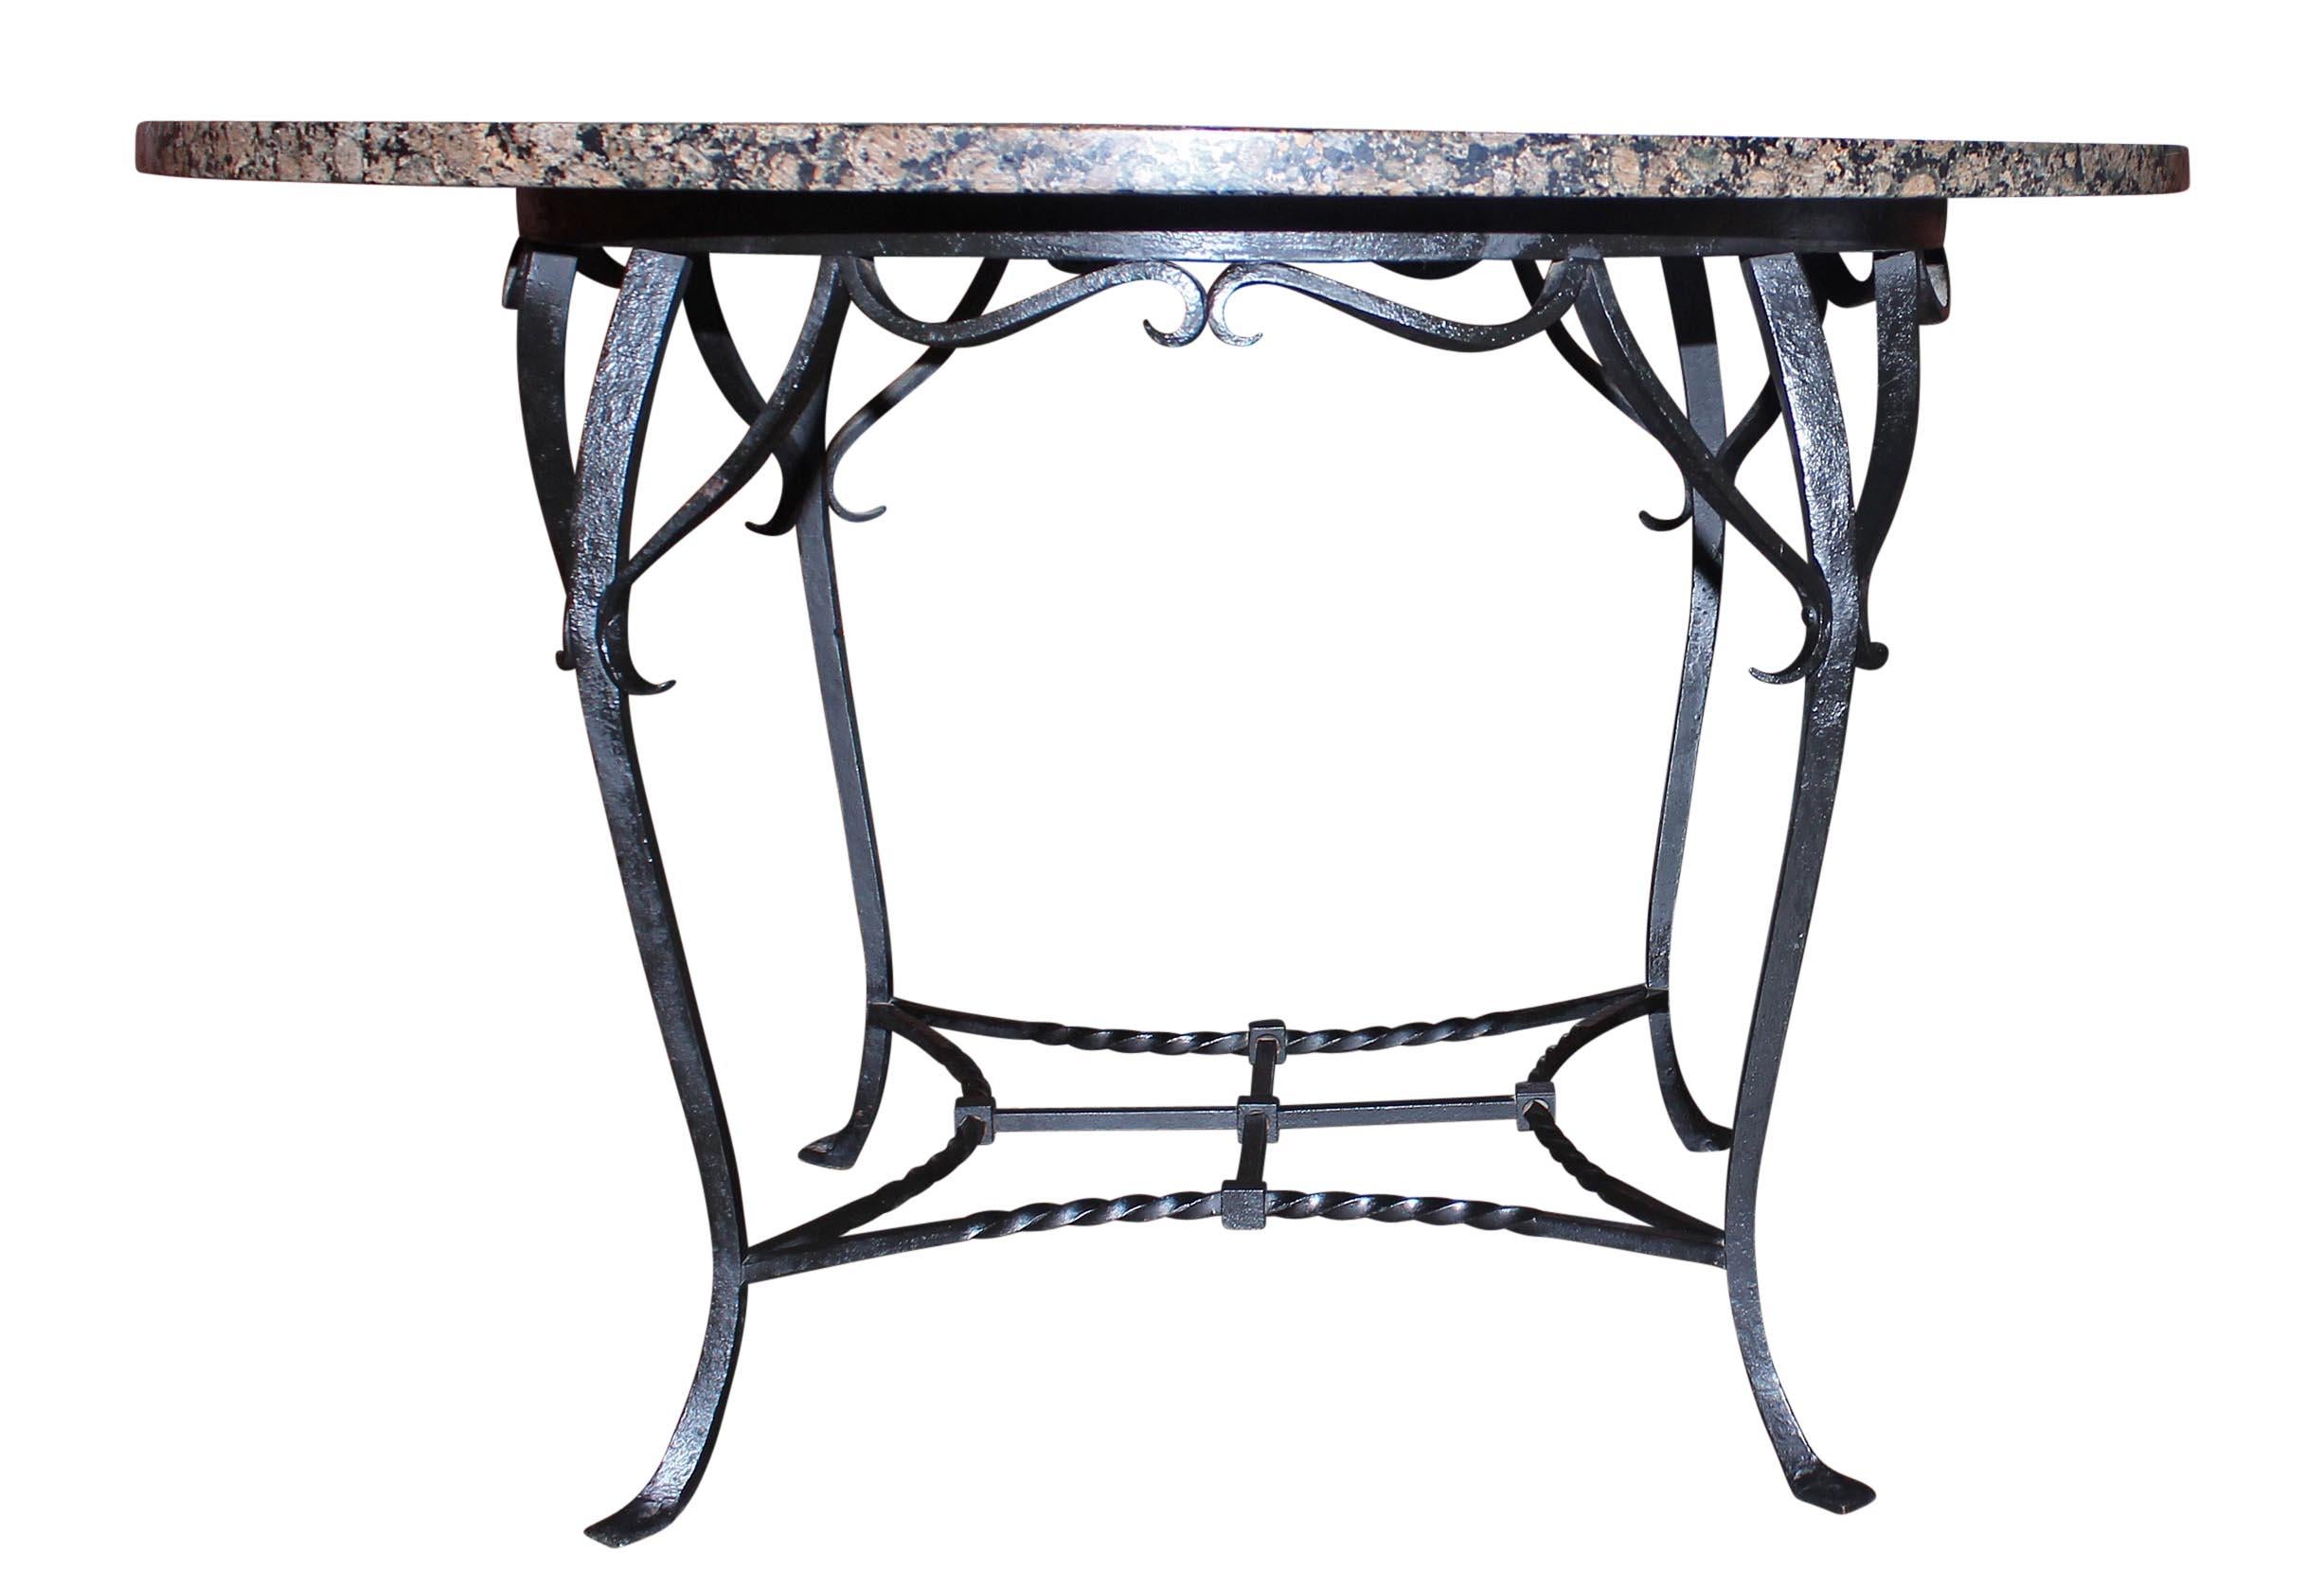 Antique wrought iron and granite dining table. Base is handmade. Table is strong and solidly built. Made circa 1910. Table may be used indoors or outdoors. Please, contact us for shipping options.